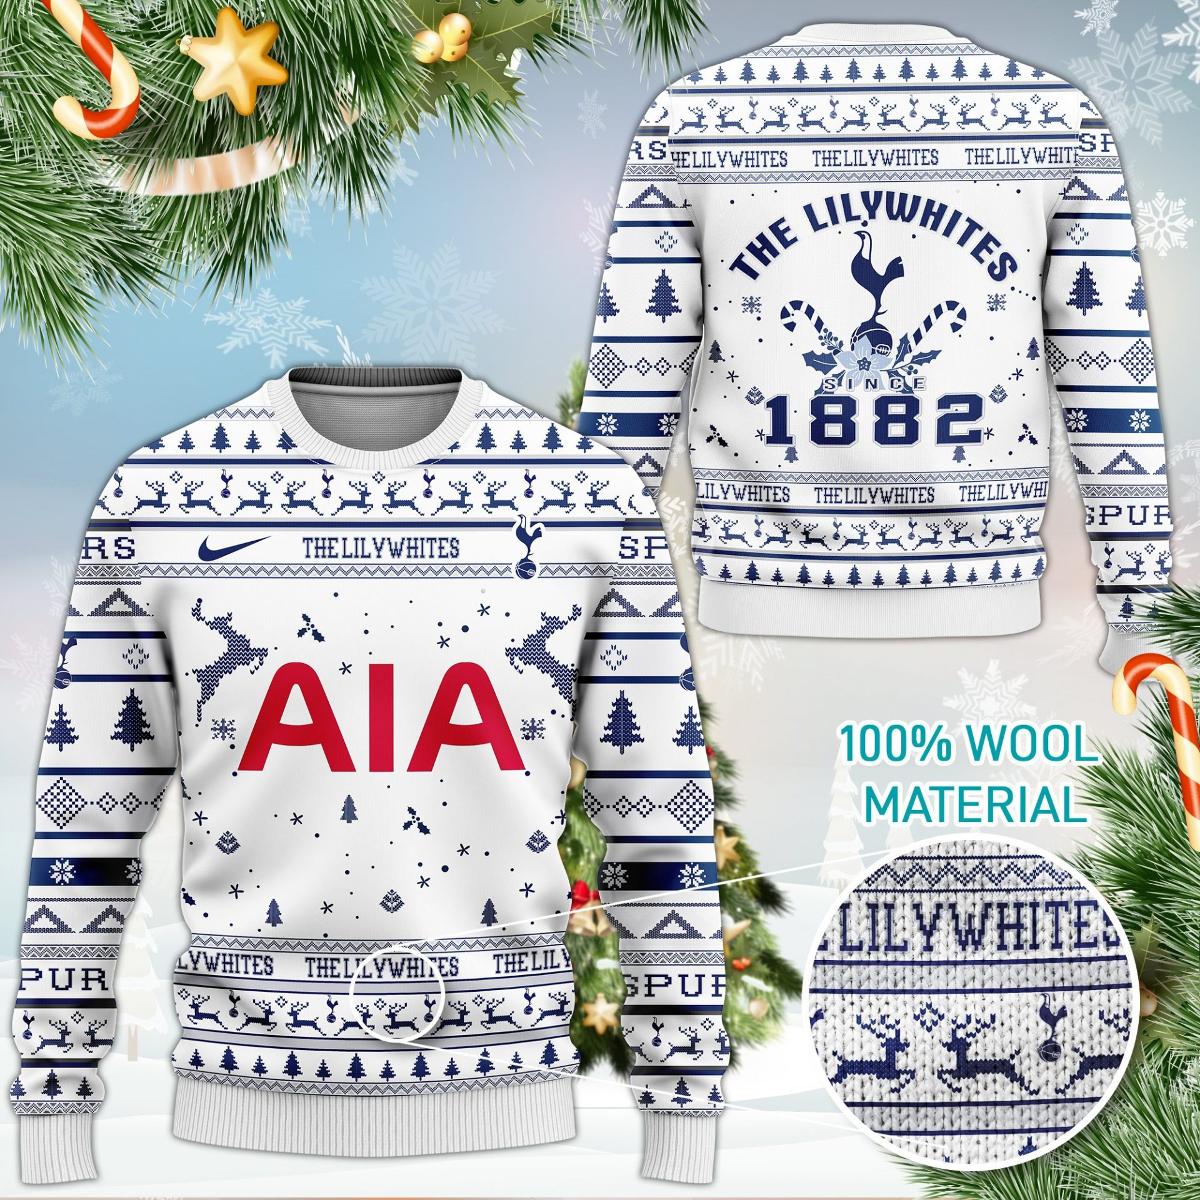 Tottenham Hotspur Fc The Lilywhites Ugly Sweater For Fans